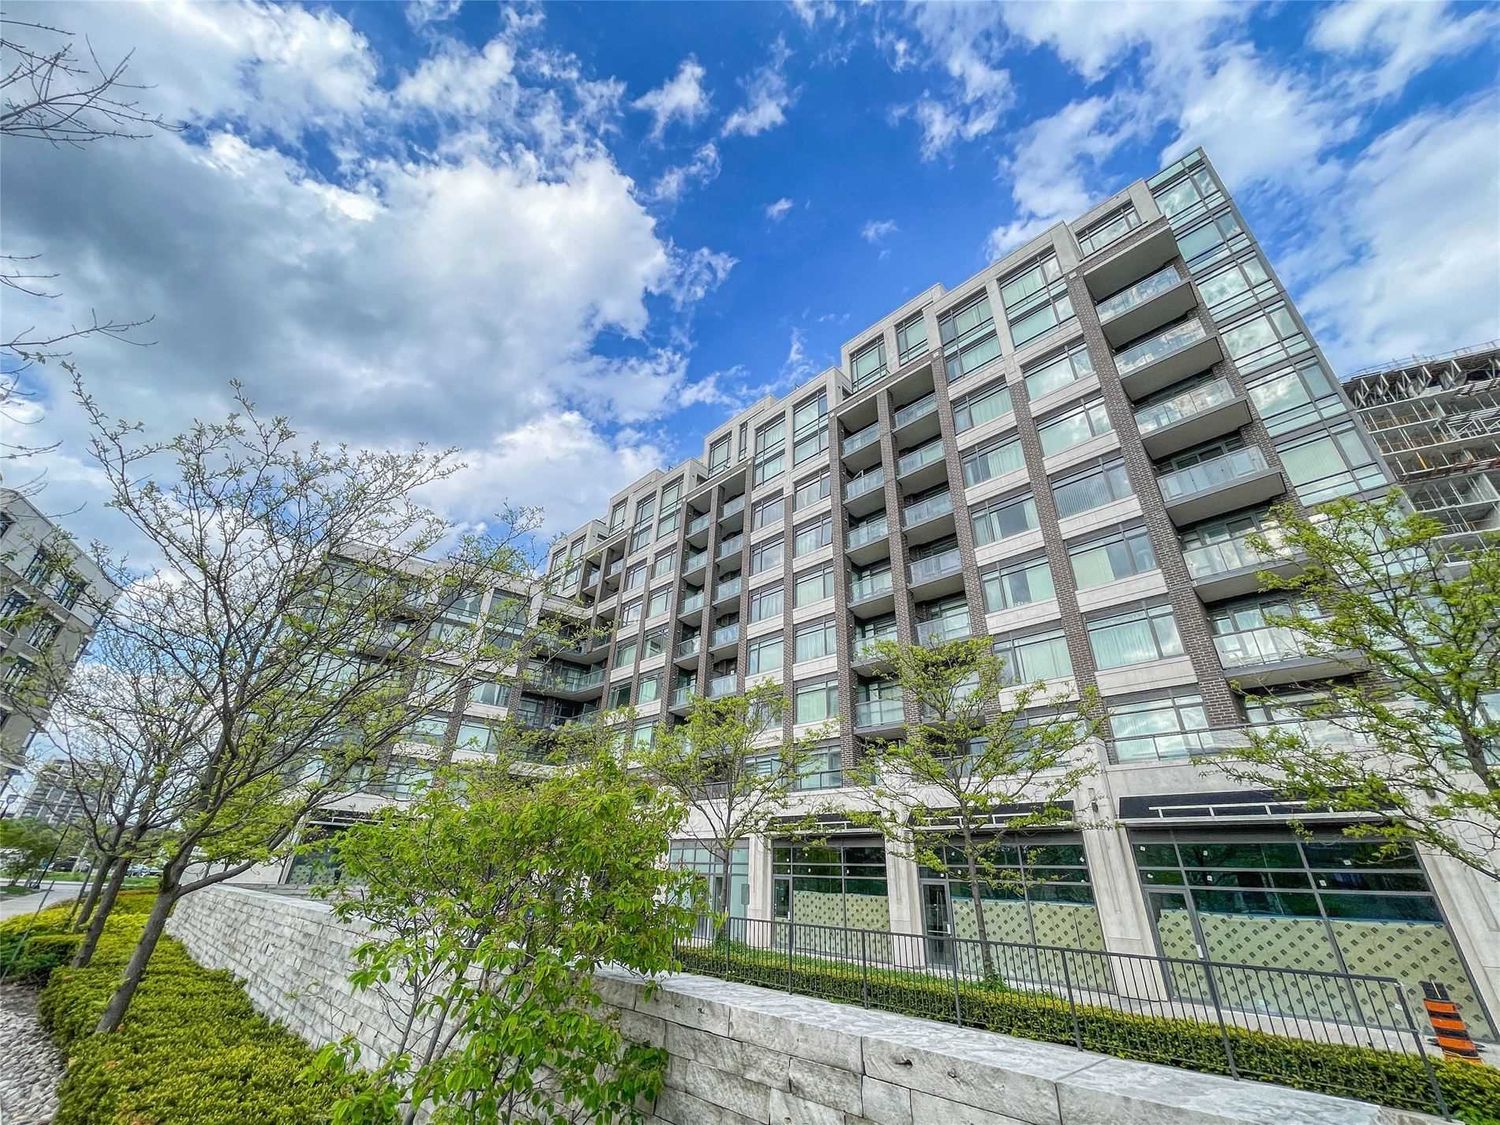 8130 Birchmount Rd. This condo at Nexus Condos is located in  Markham, Toronto - image #2 of 3 by Strata.ca